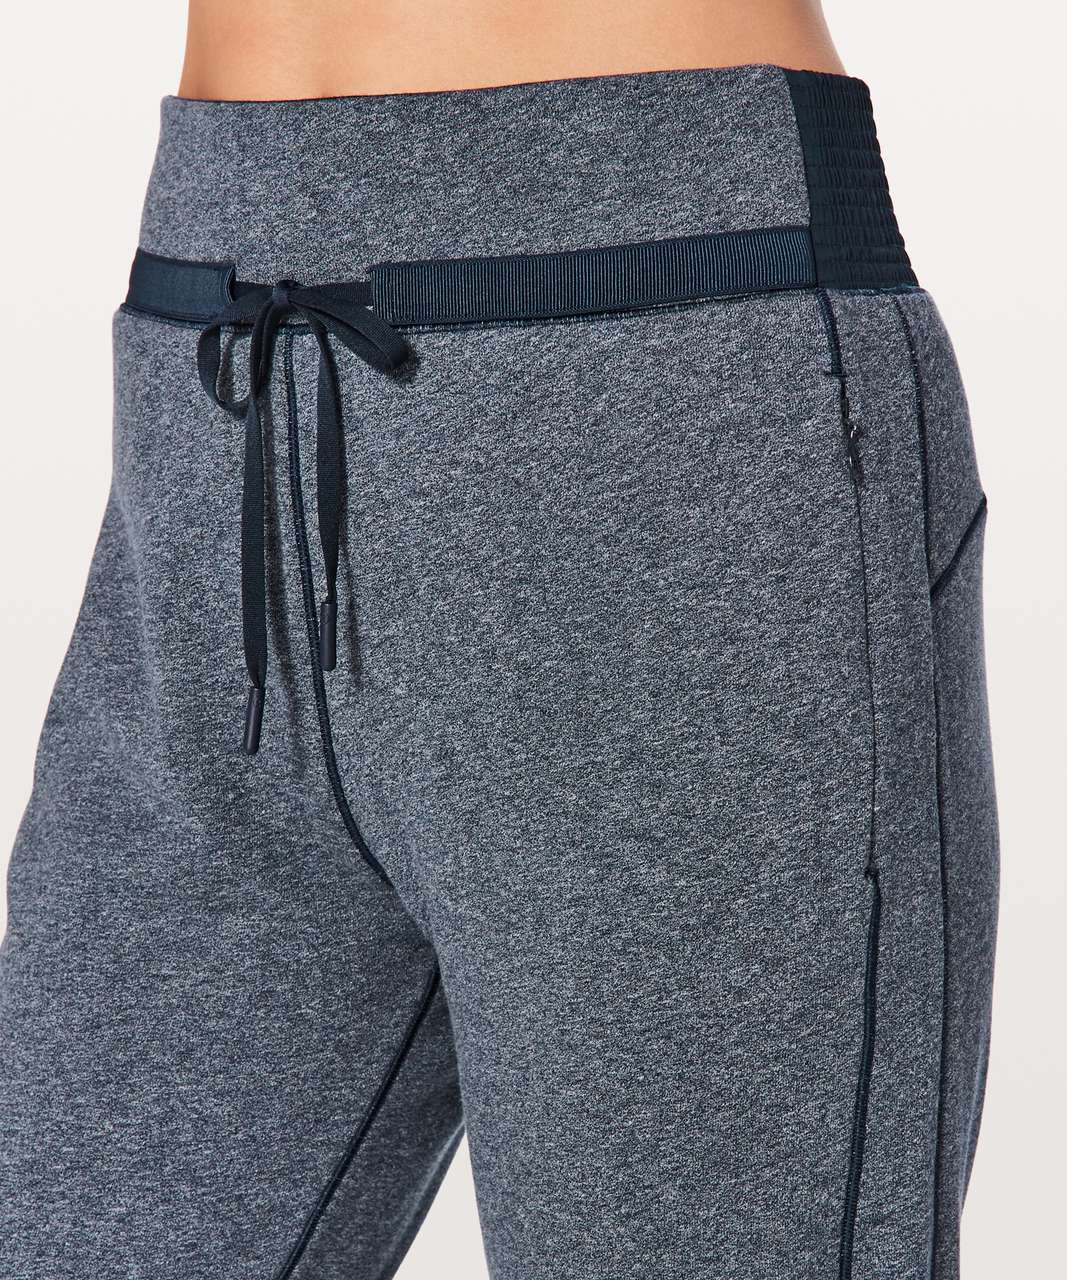 Lululemon Cool & Collected Jogger *28